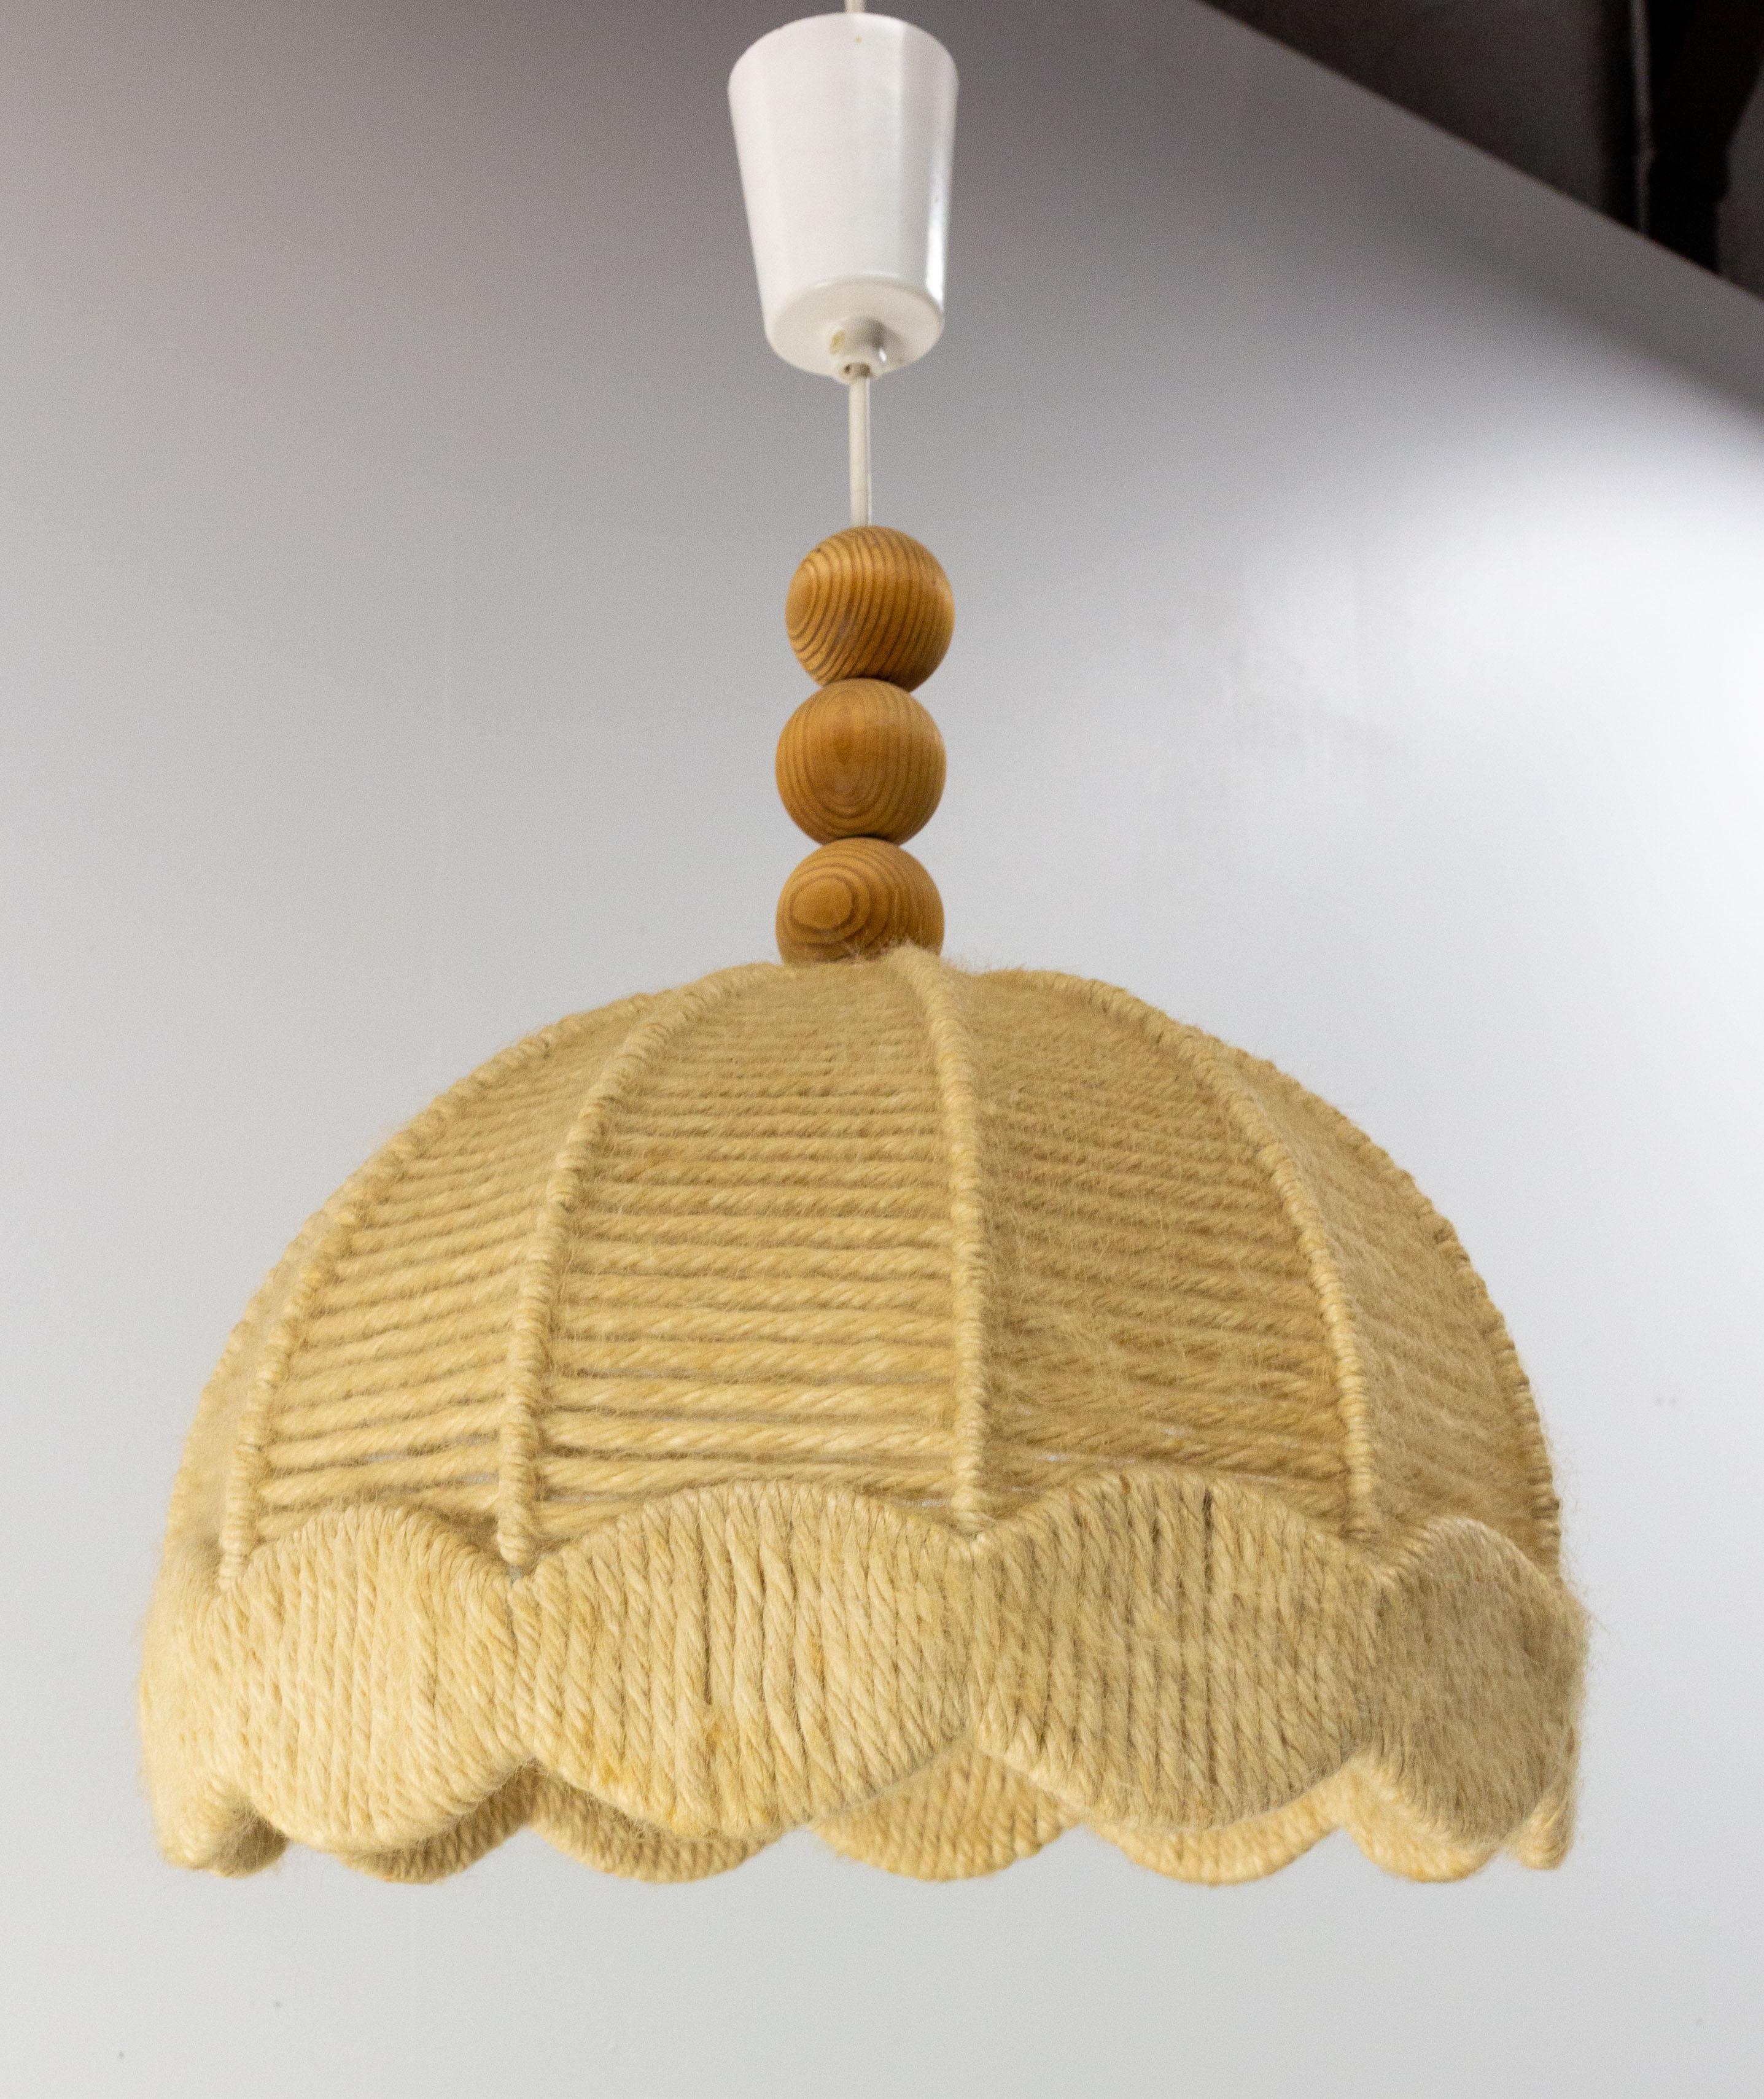 Ceiling pendant, France
Lustre made of natural wool on a metallic frame.
Soft and pleasant lighting.
The height of the chandelier on the photos is minimal. It is possible to lengthen it by adjusting the length of the thread up to 25.60 in. (65